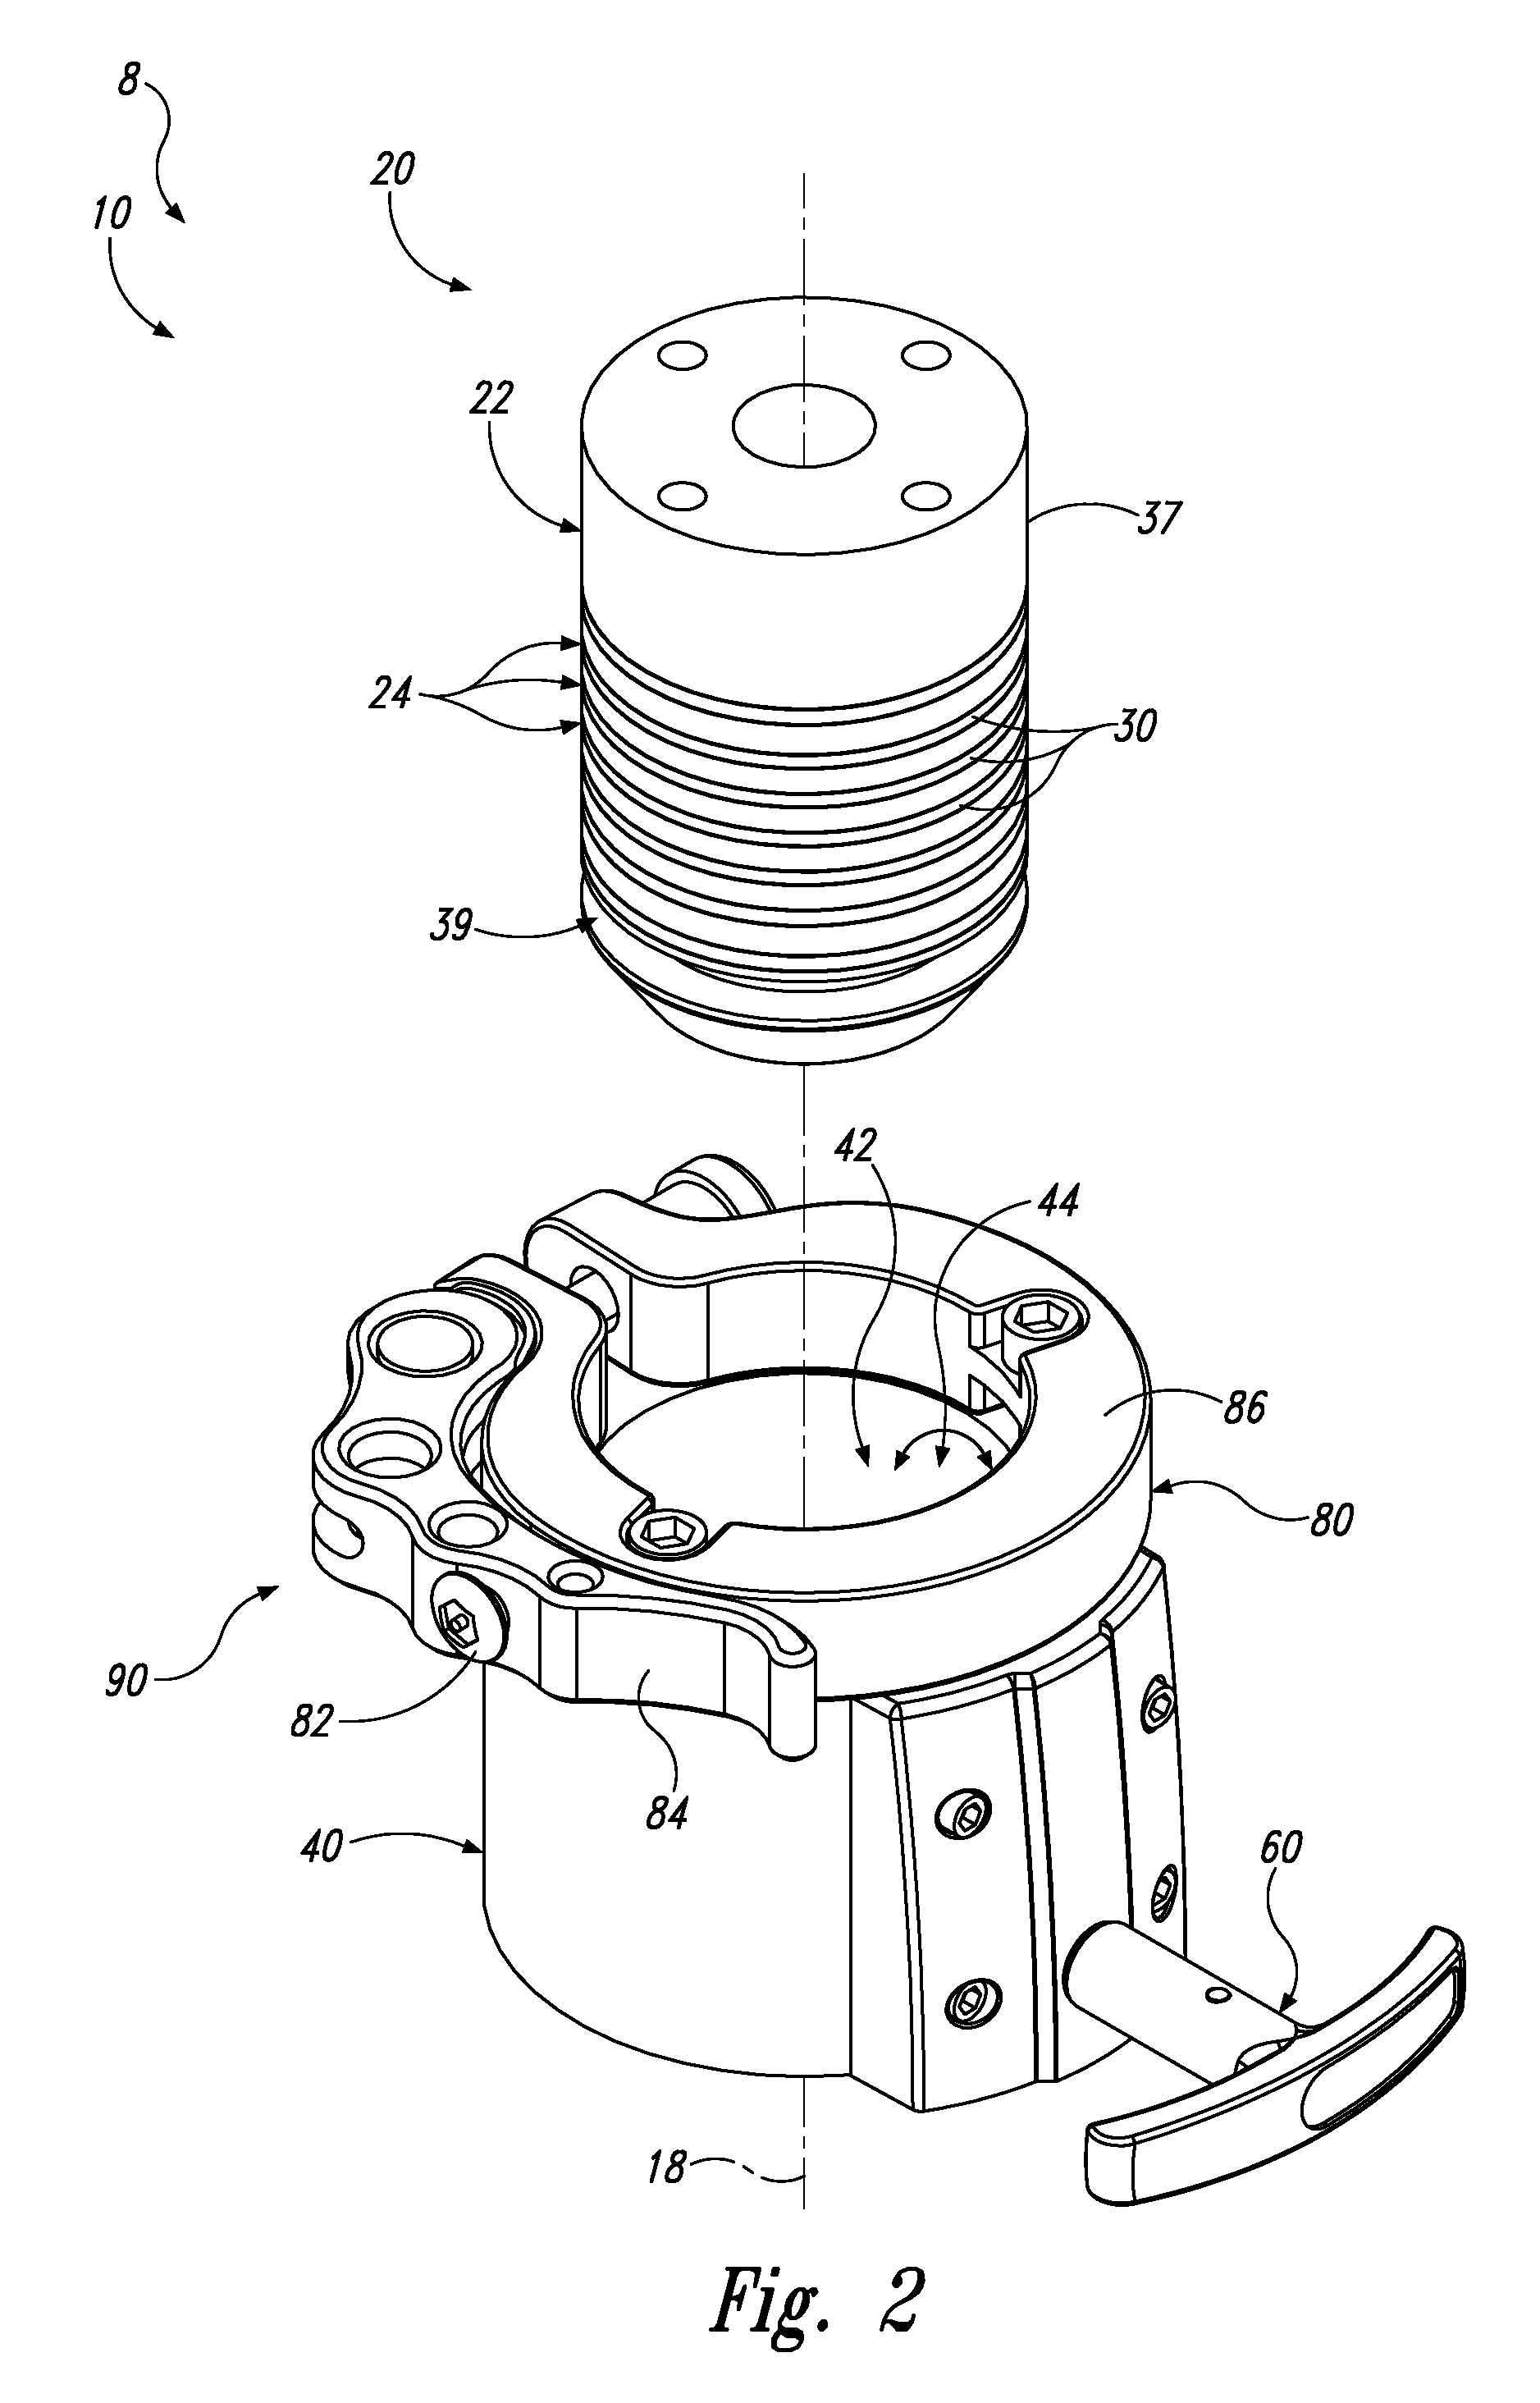 Electrical and physical mounting assemblies